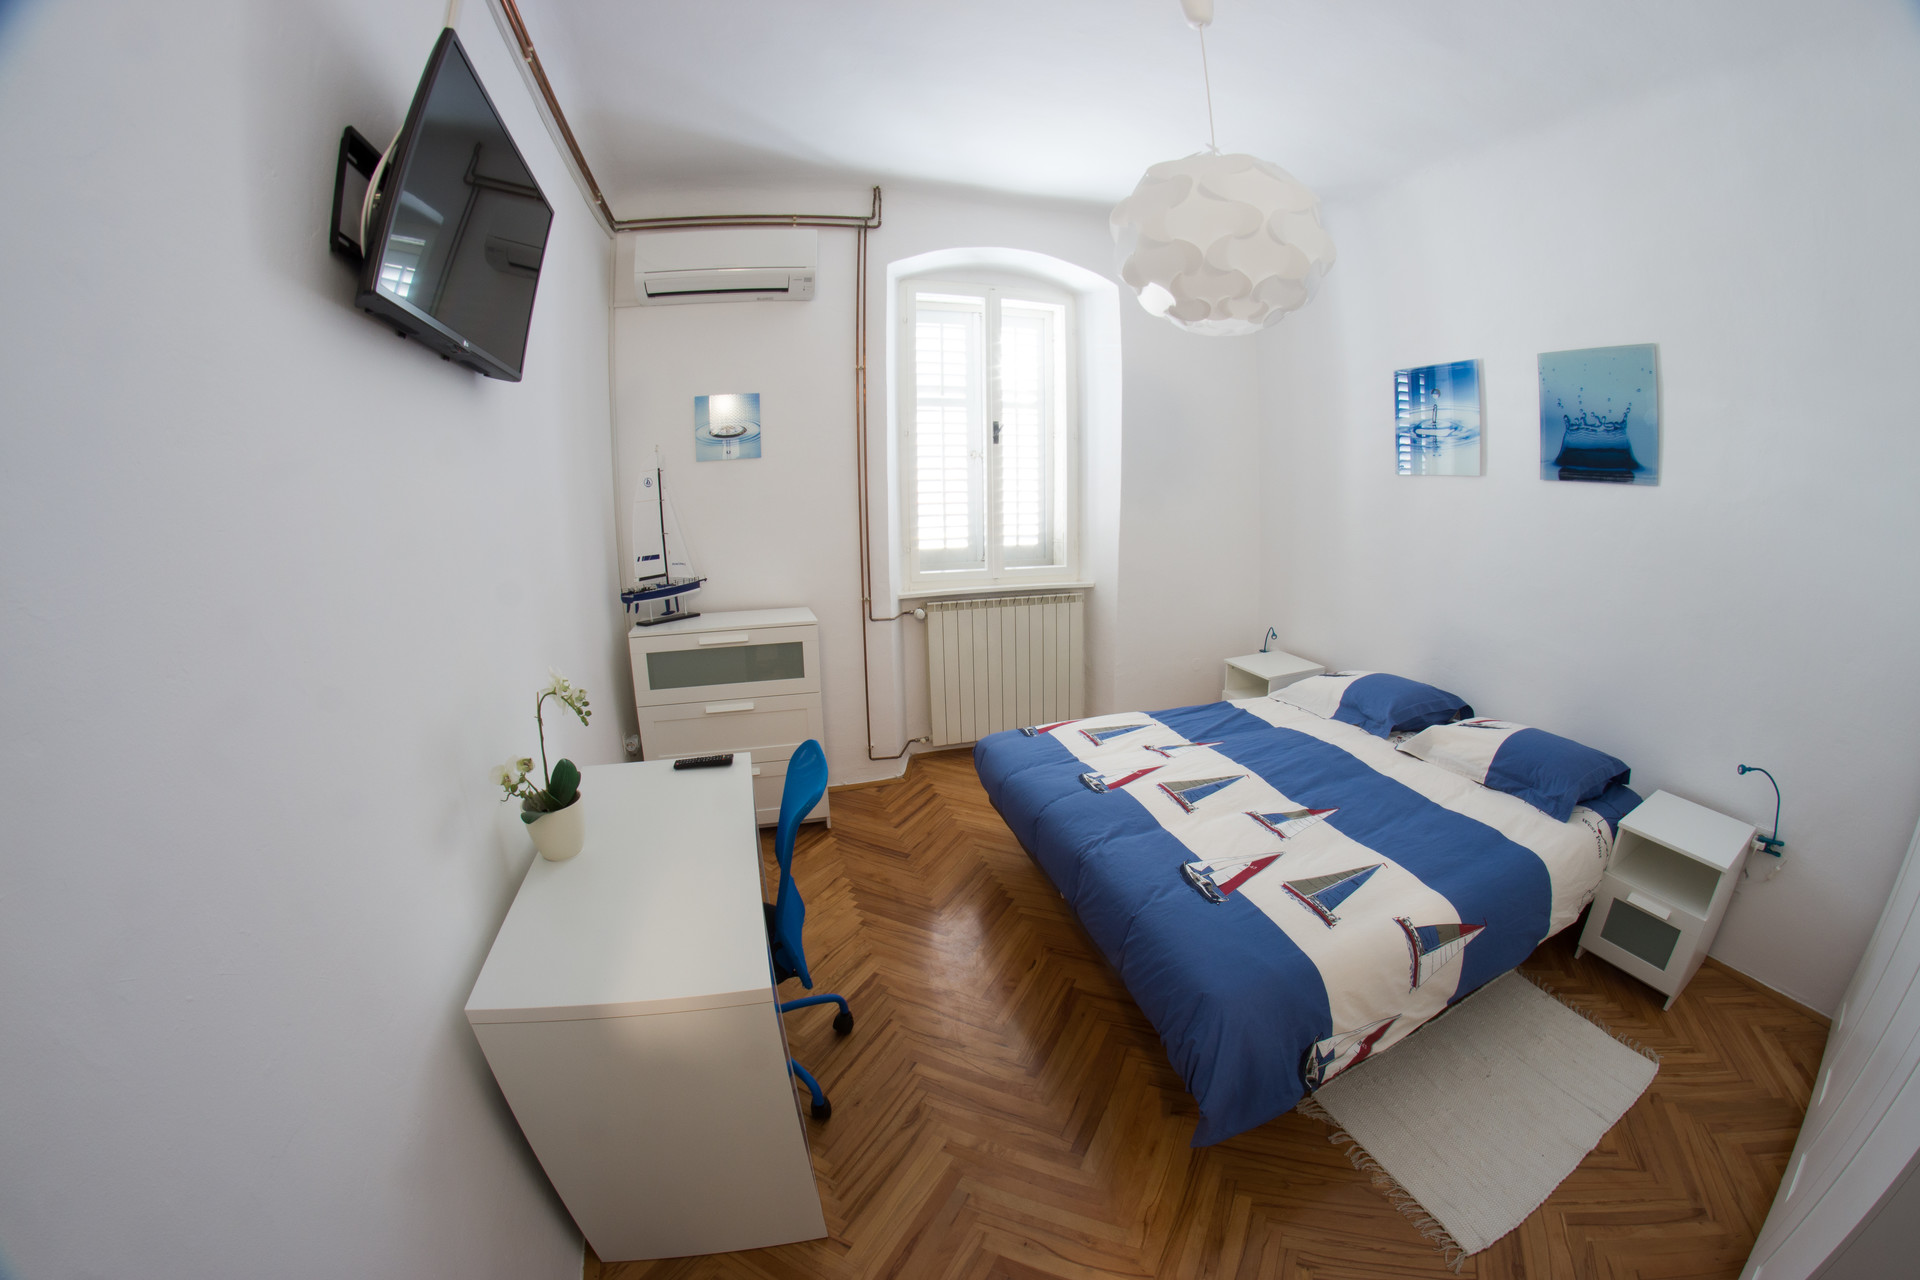 Rooms for students - only girls | Room for rent Koper